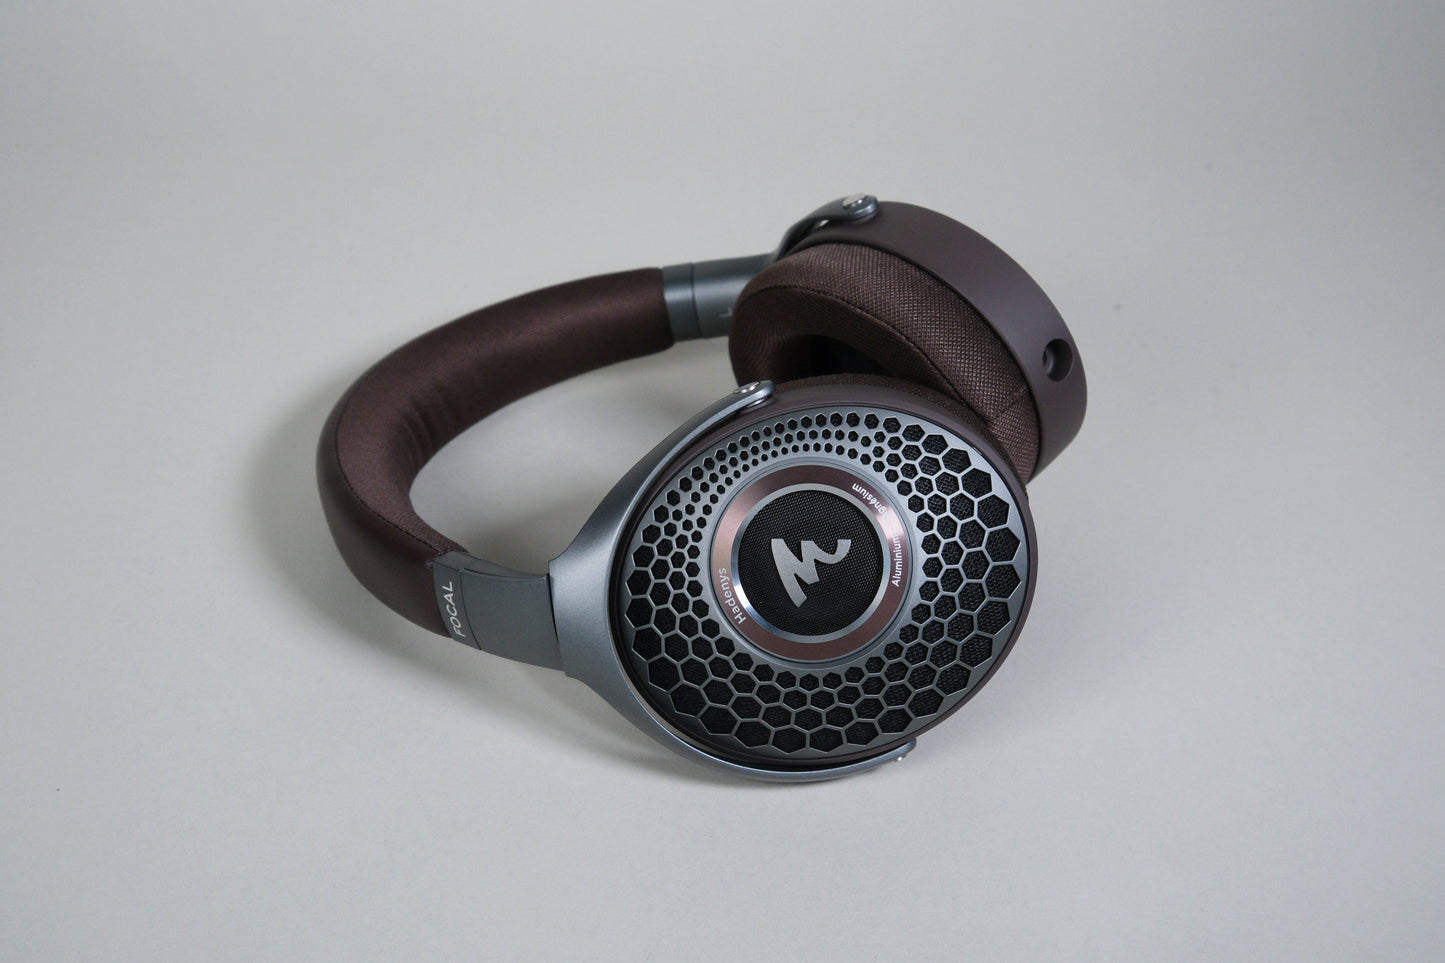 Focal Hadenys Open-back Dynamic Driver Headphones made in France - Headphones.com